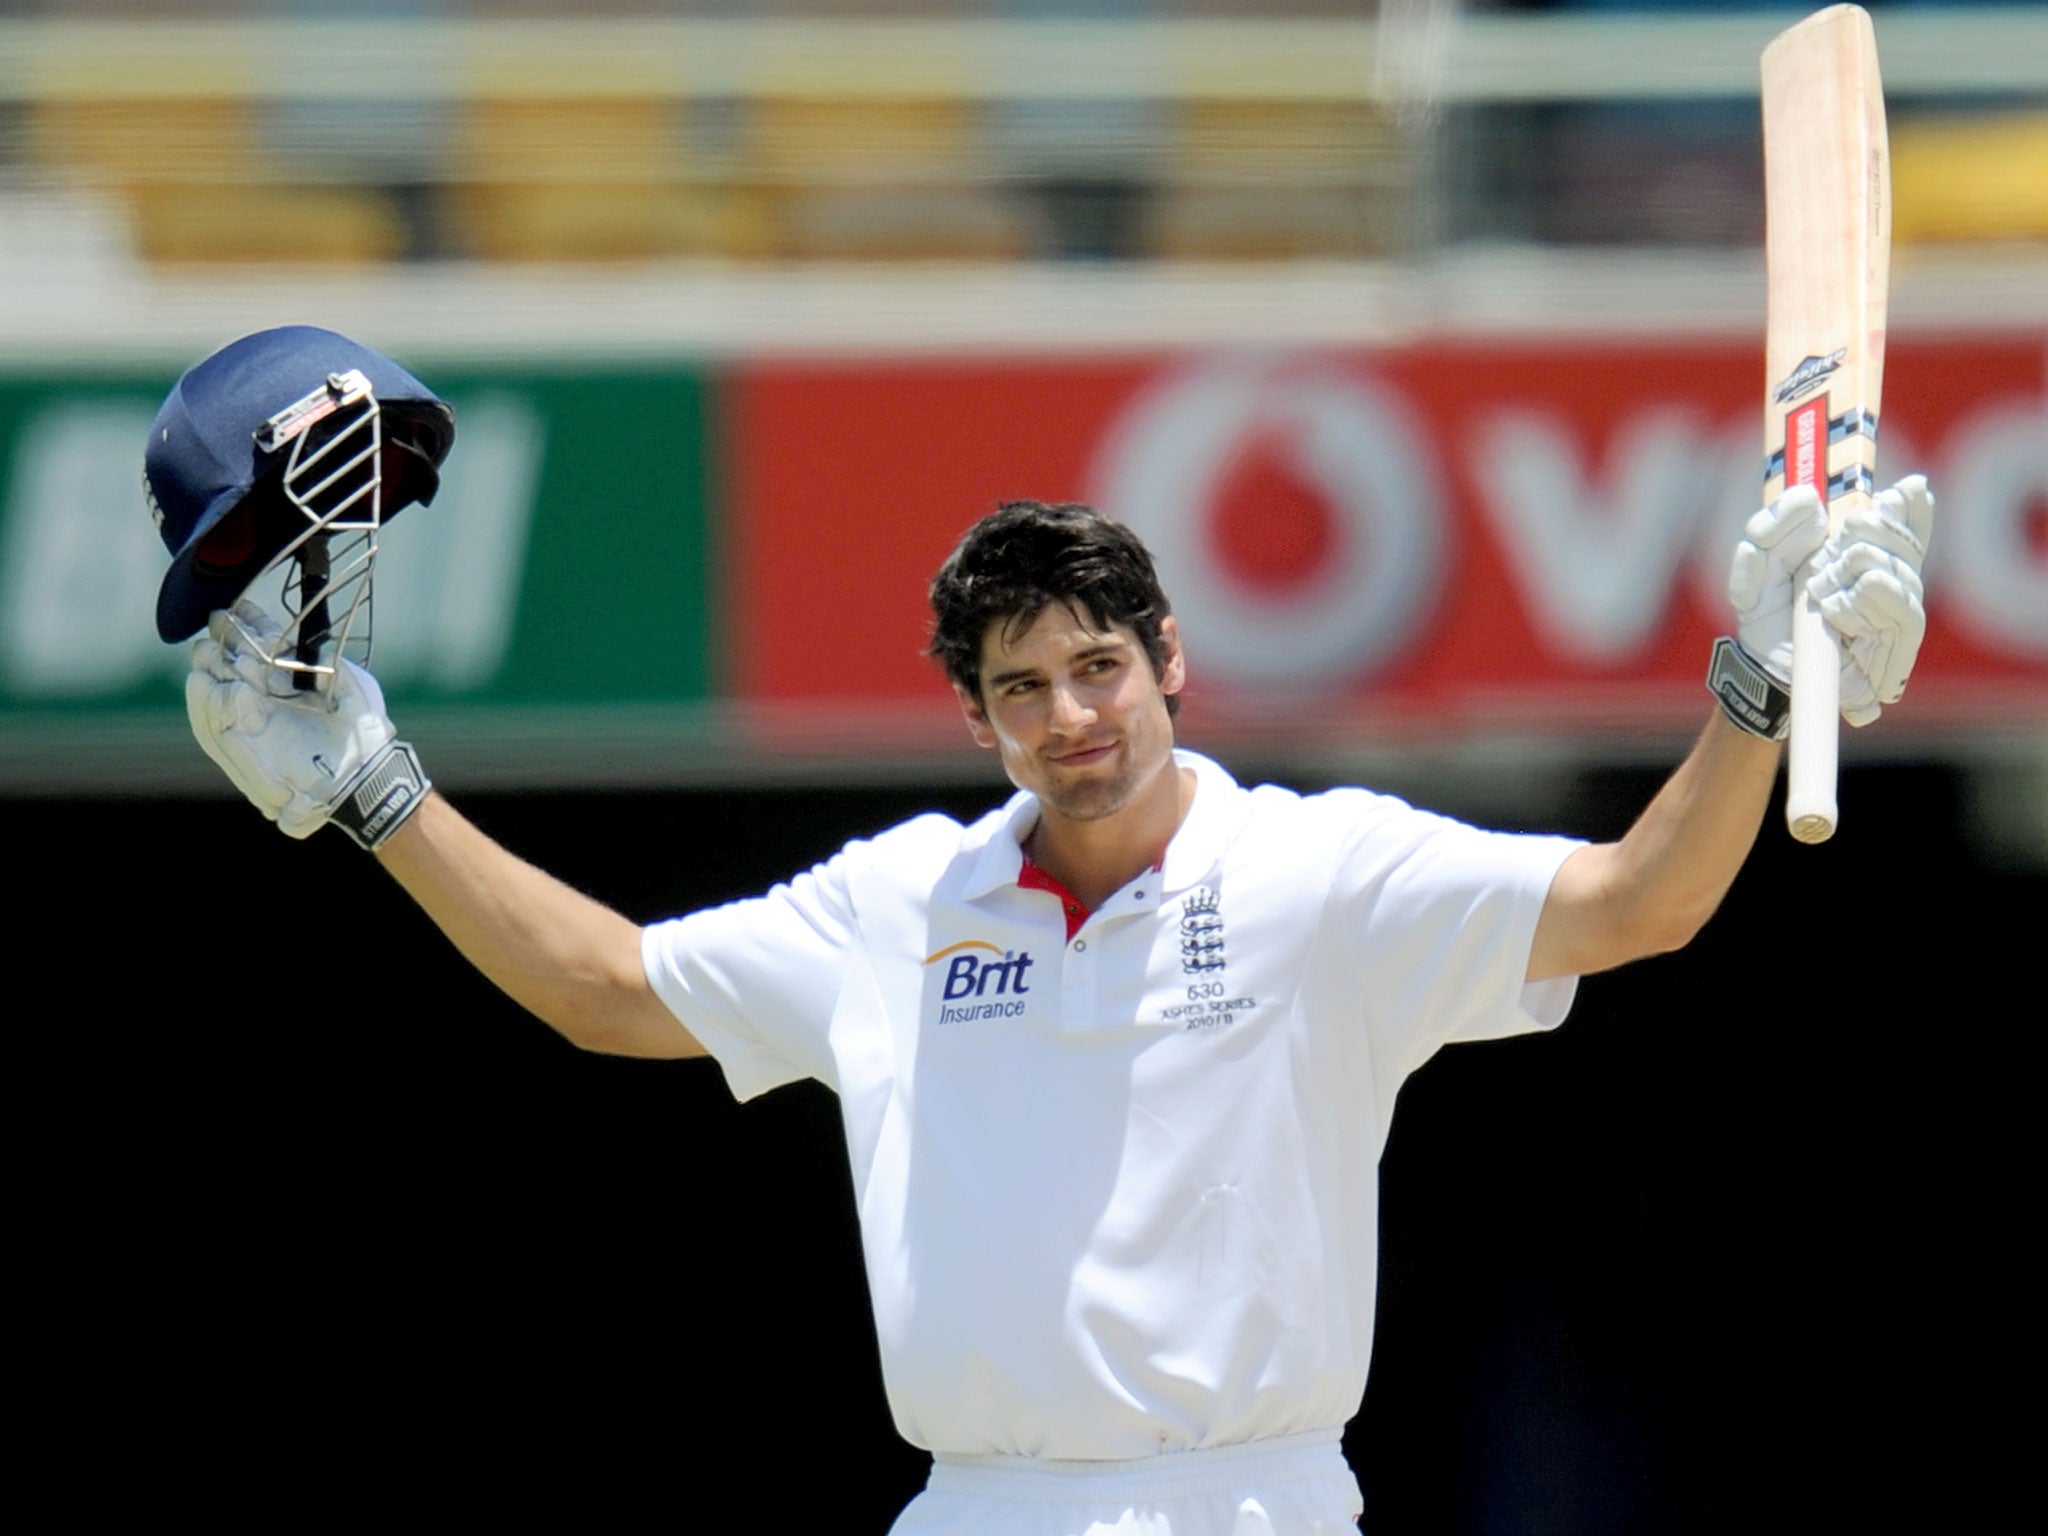 Alastair Cook celebrates reaching his double century at Brisbane on his way to 235 not out in a drawn Test. He goes on to score 766 runs in the series.